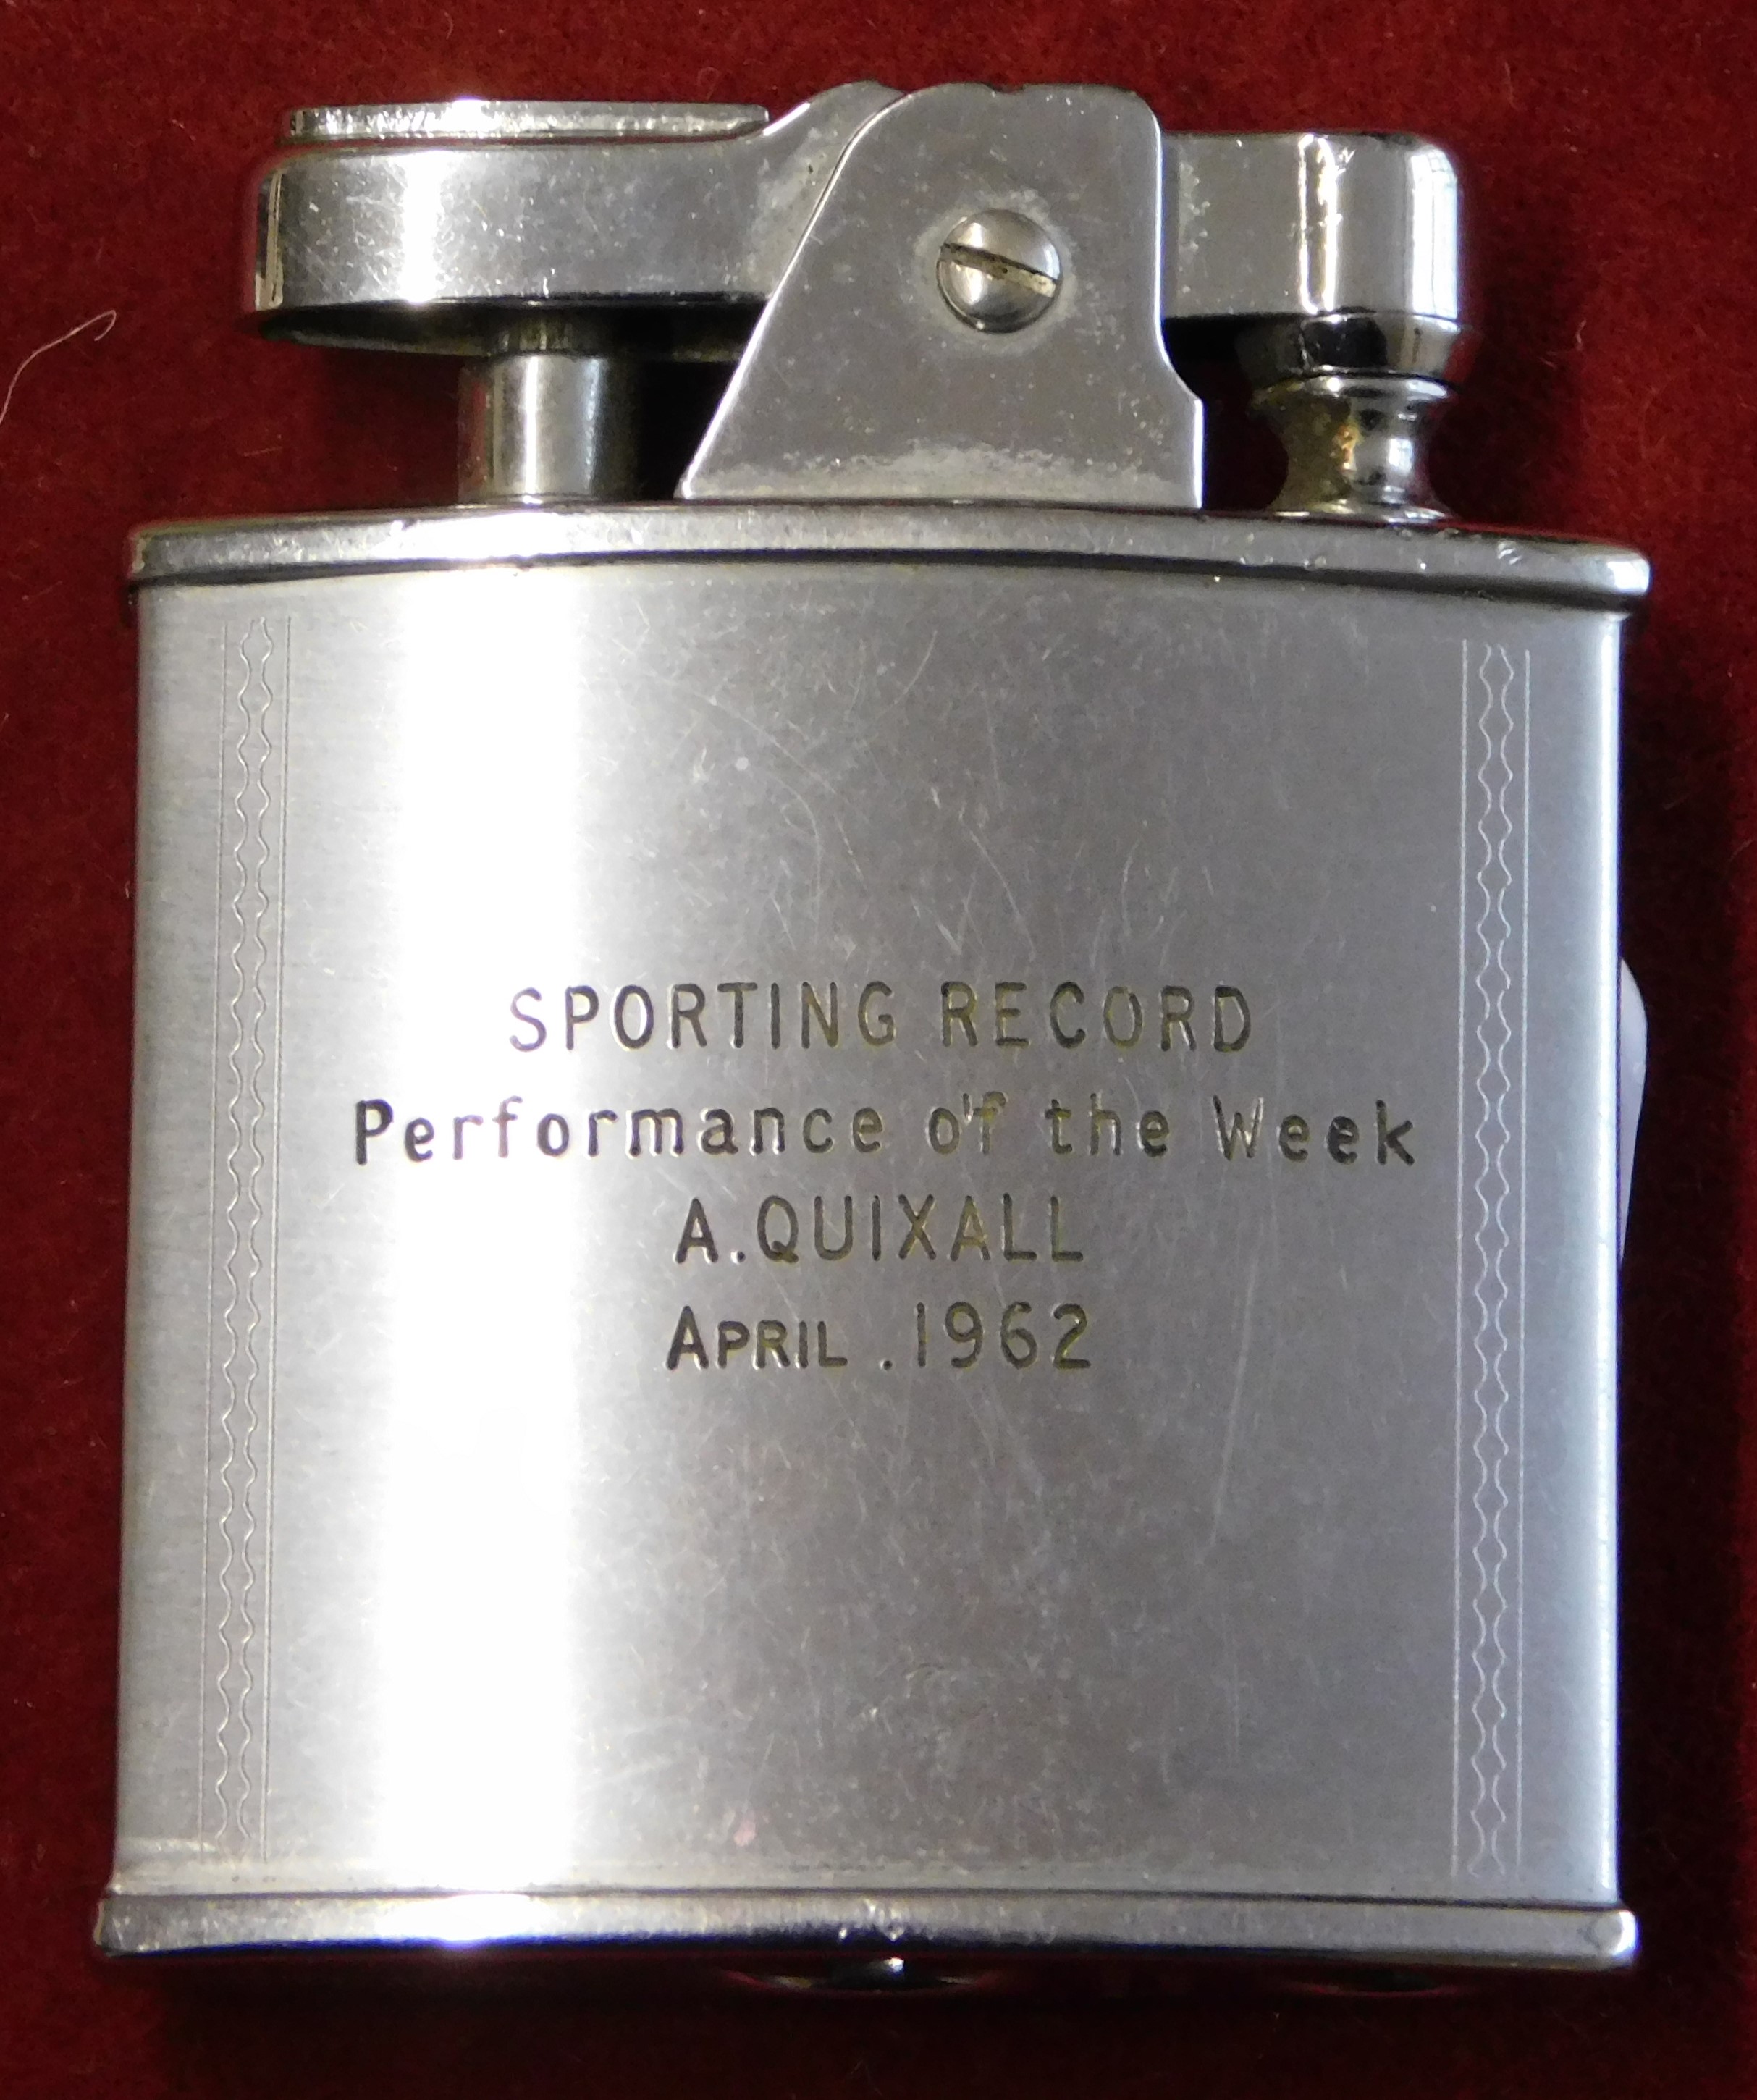 A lighter presented to Albert Quixall of Manchester United engraved with his name for the